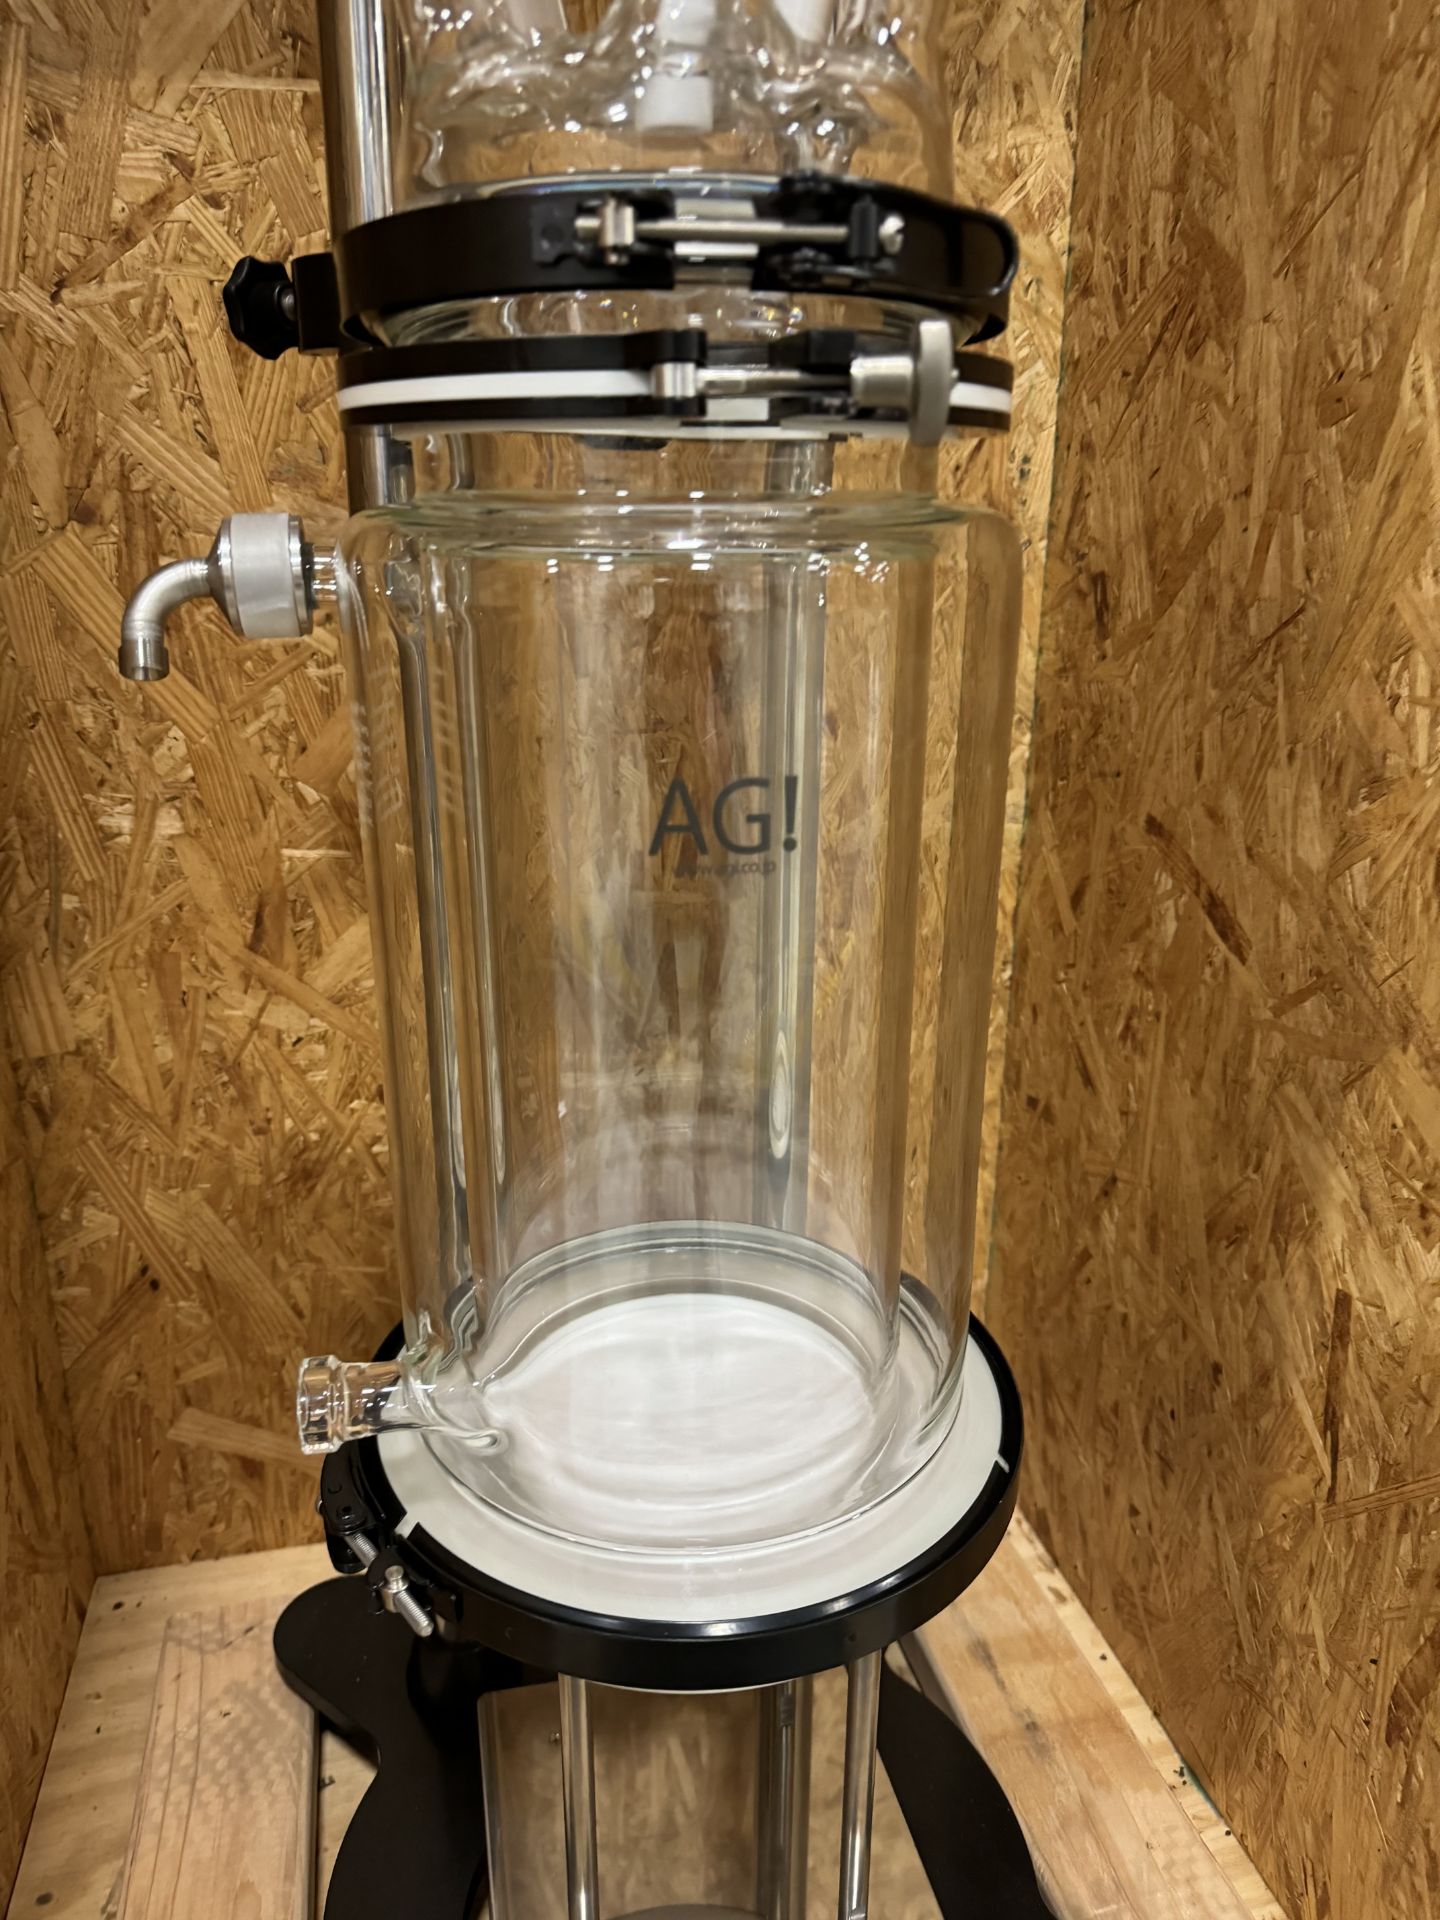 New/Unused Cascade Sciences CS-5L 5L Asahi Glass Reactor. Body Vessel ONLY - Image 3 of 4